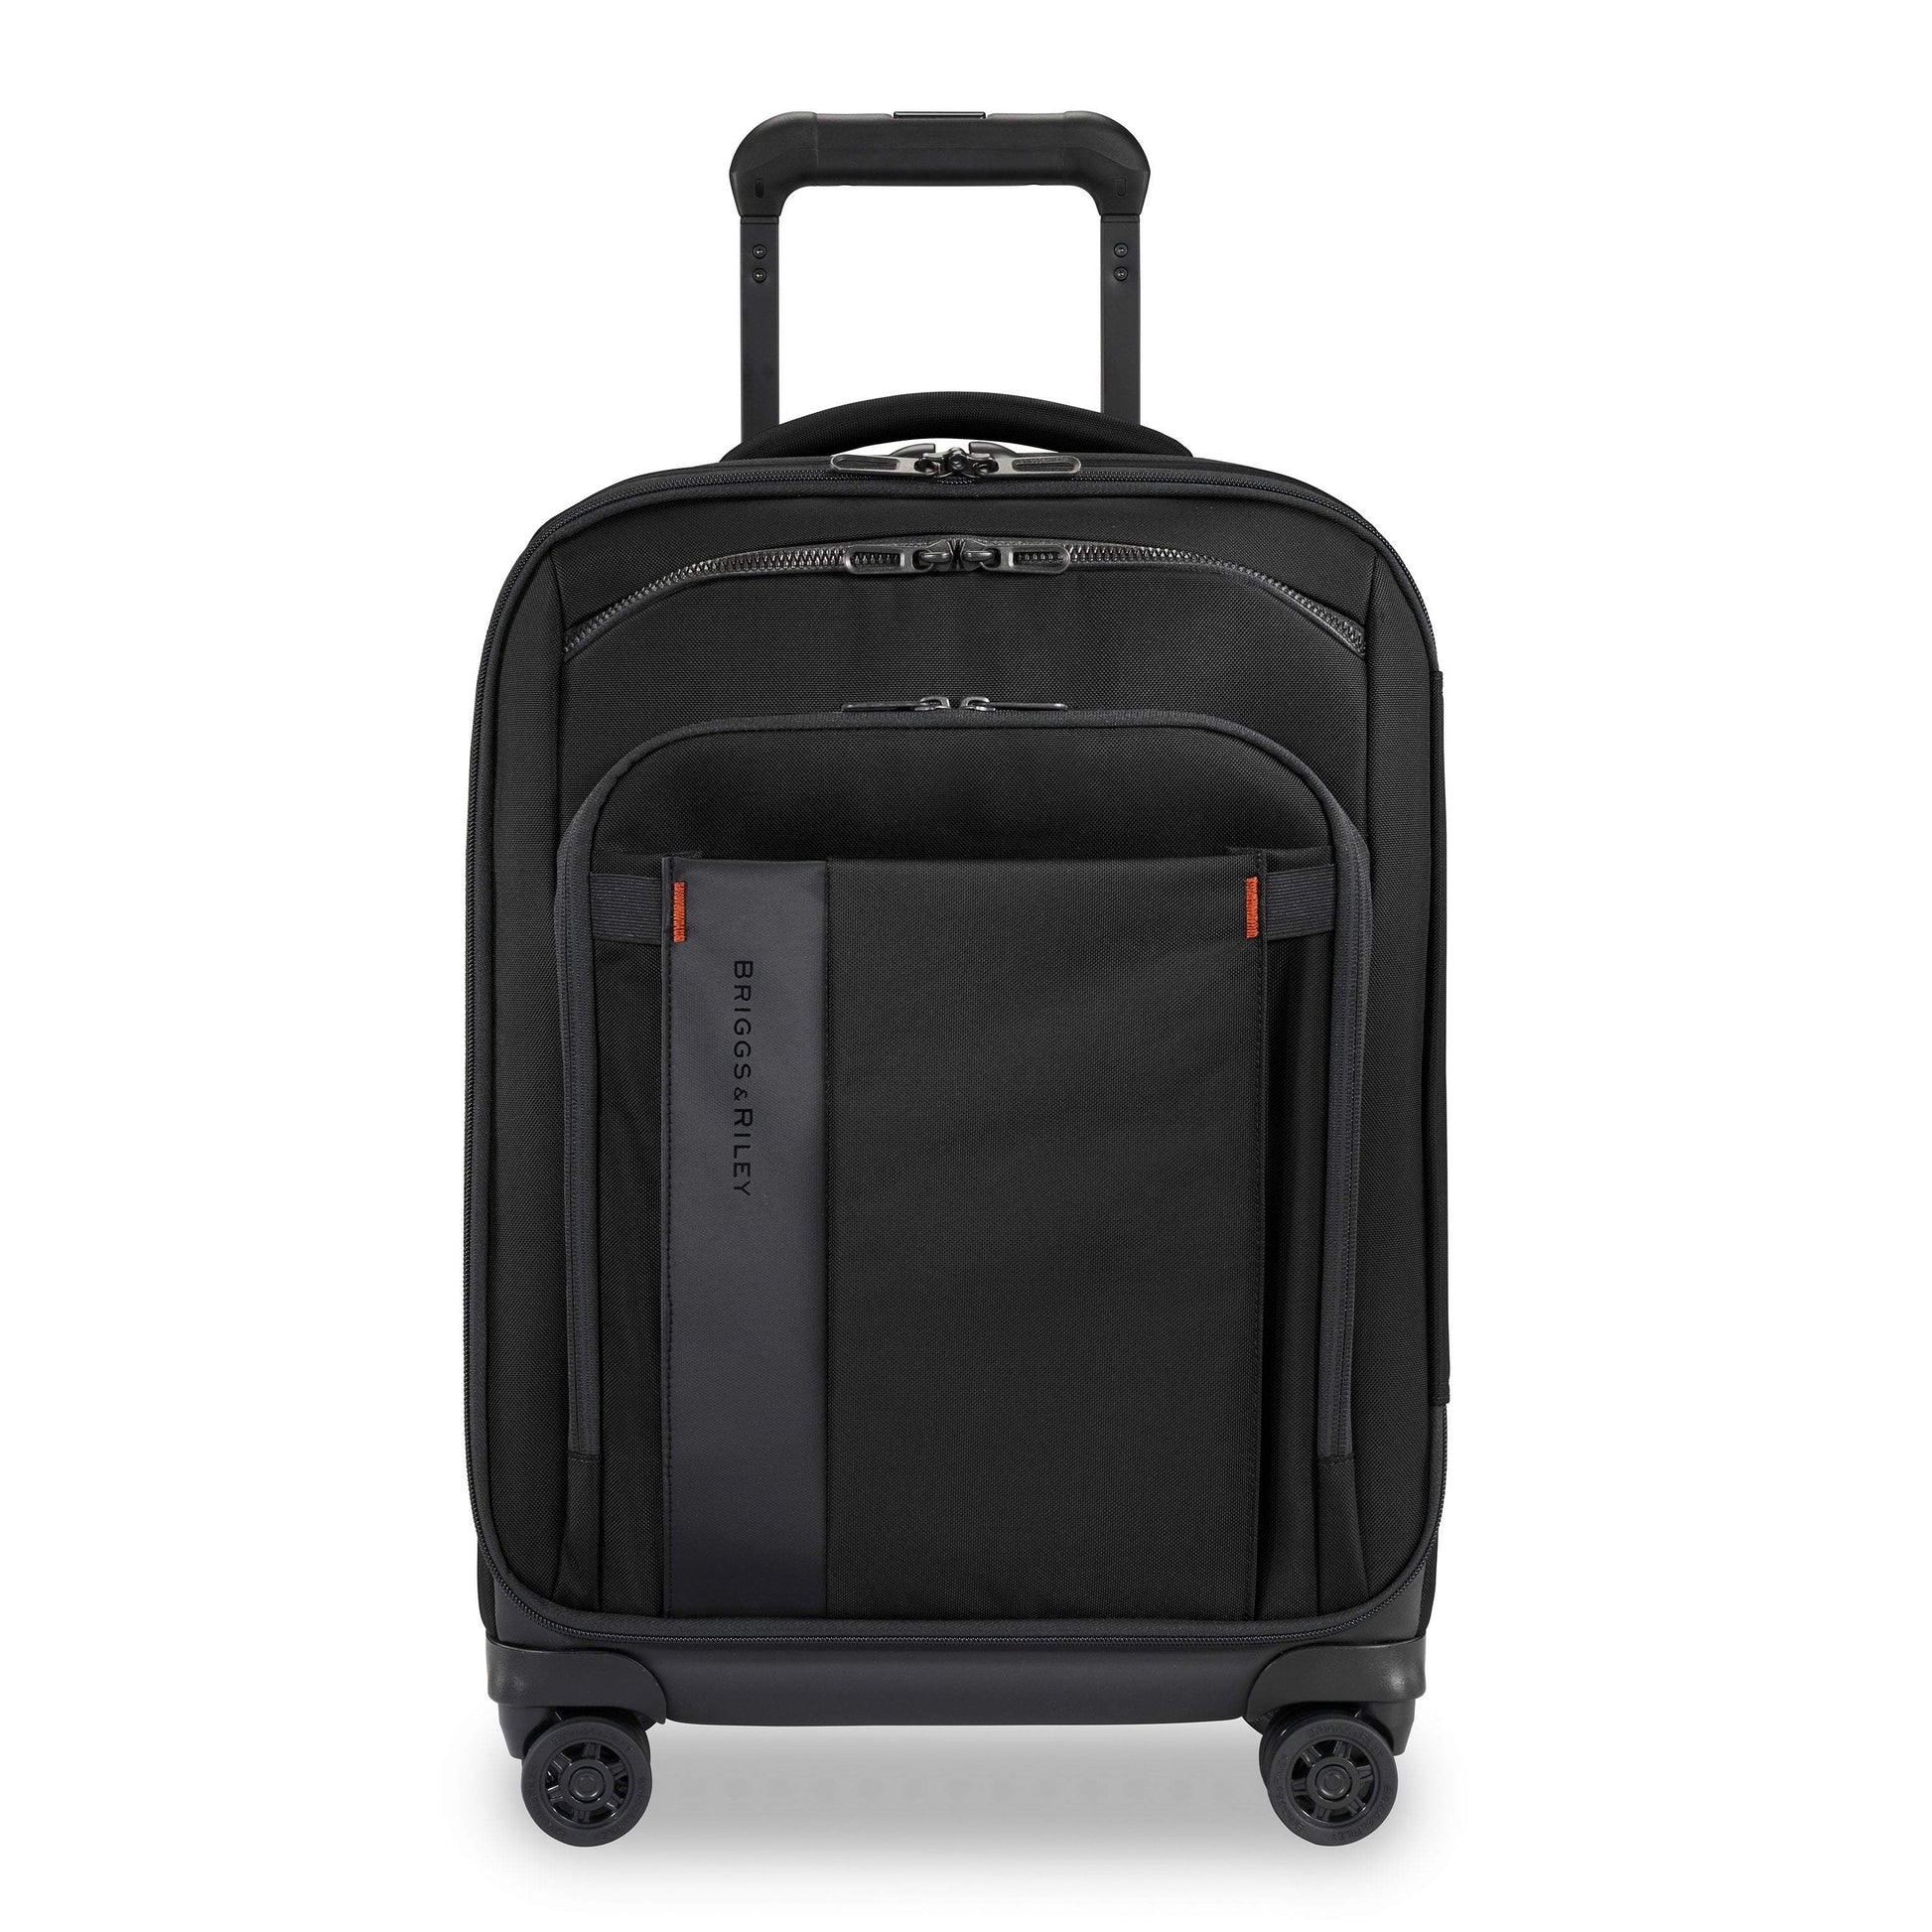 Briggs & Riley ZDX 21" Carry-On Expandable Spinner Luggage - Black